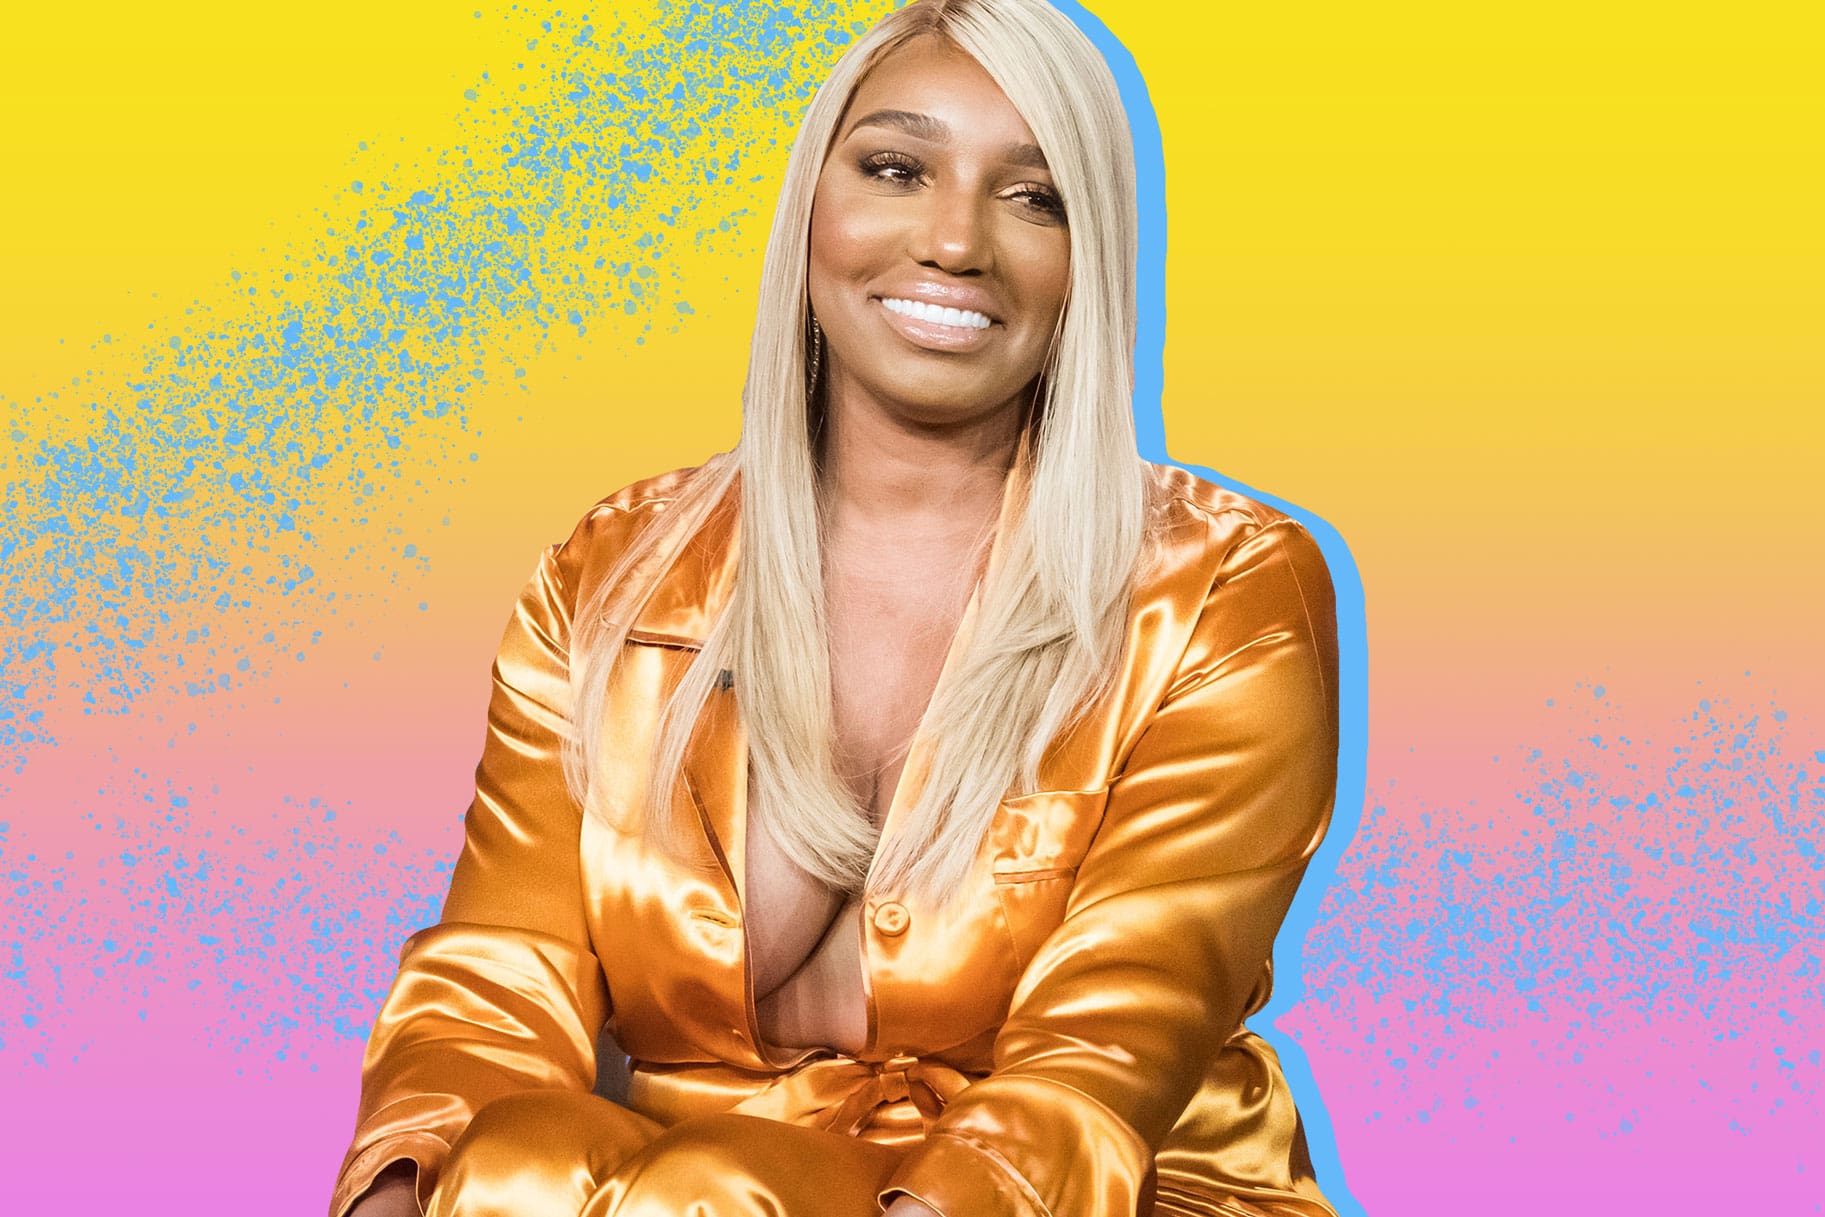 https://celebrityinsider.org/nene-leakes-thinks-kenya-moore-is-lying-about-marc-dalys-infidelities-and-here-is-what-she-plans-to-do-about-it-328454/